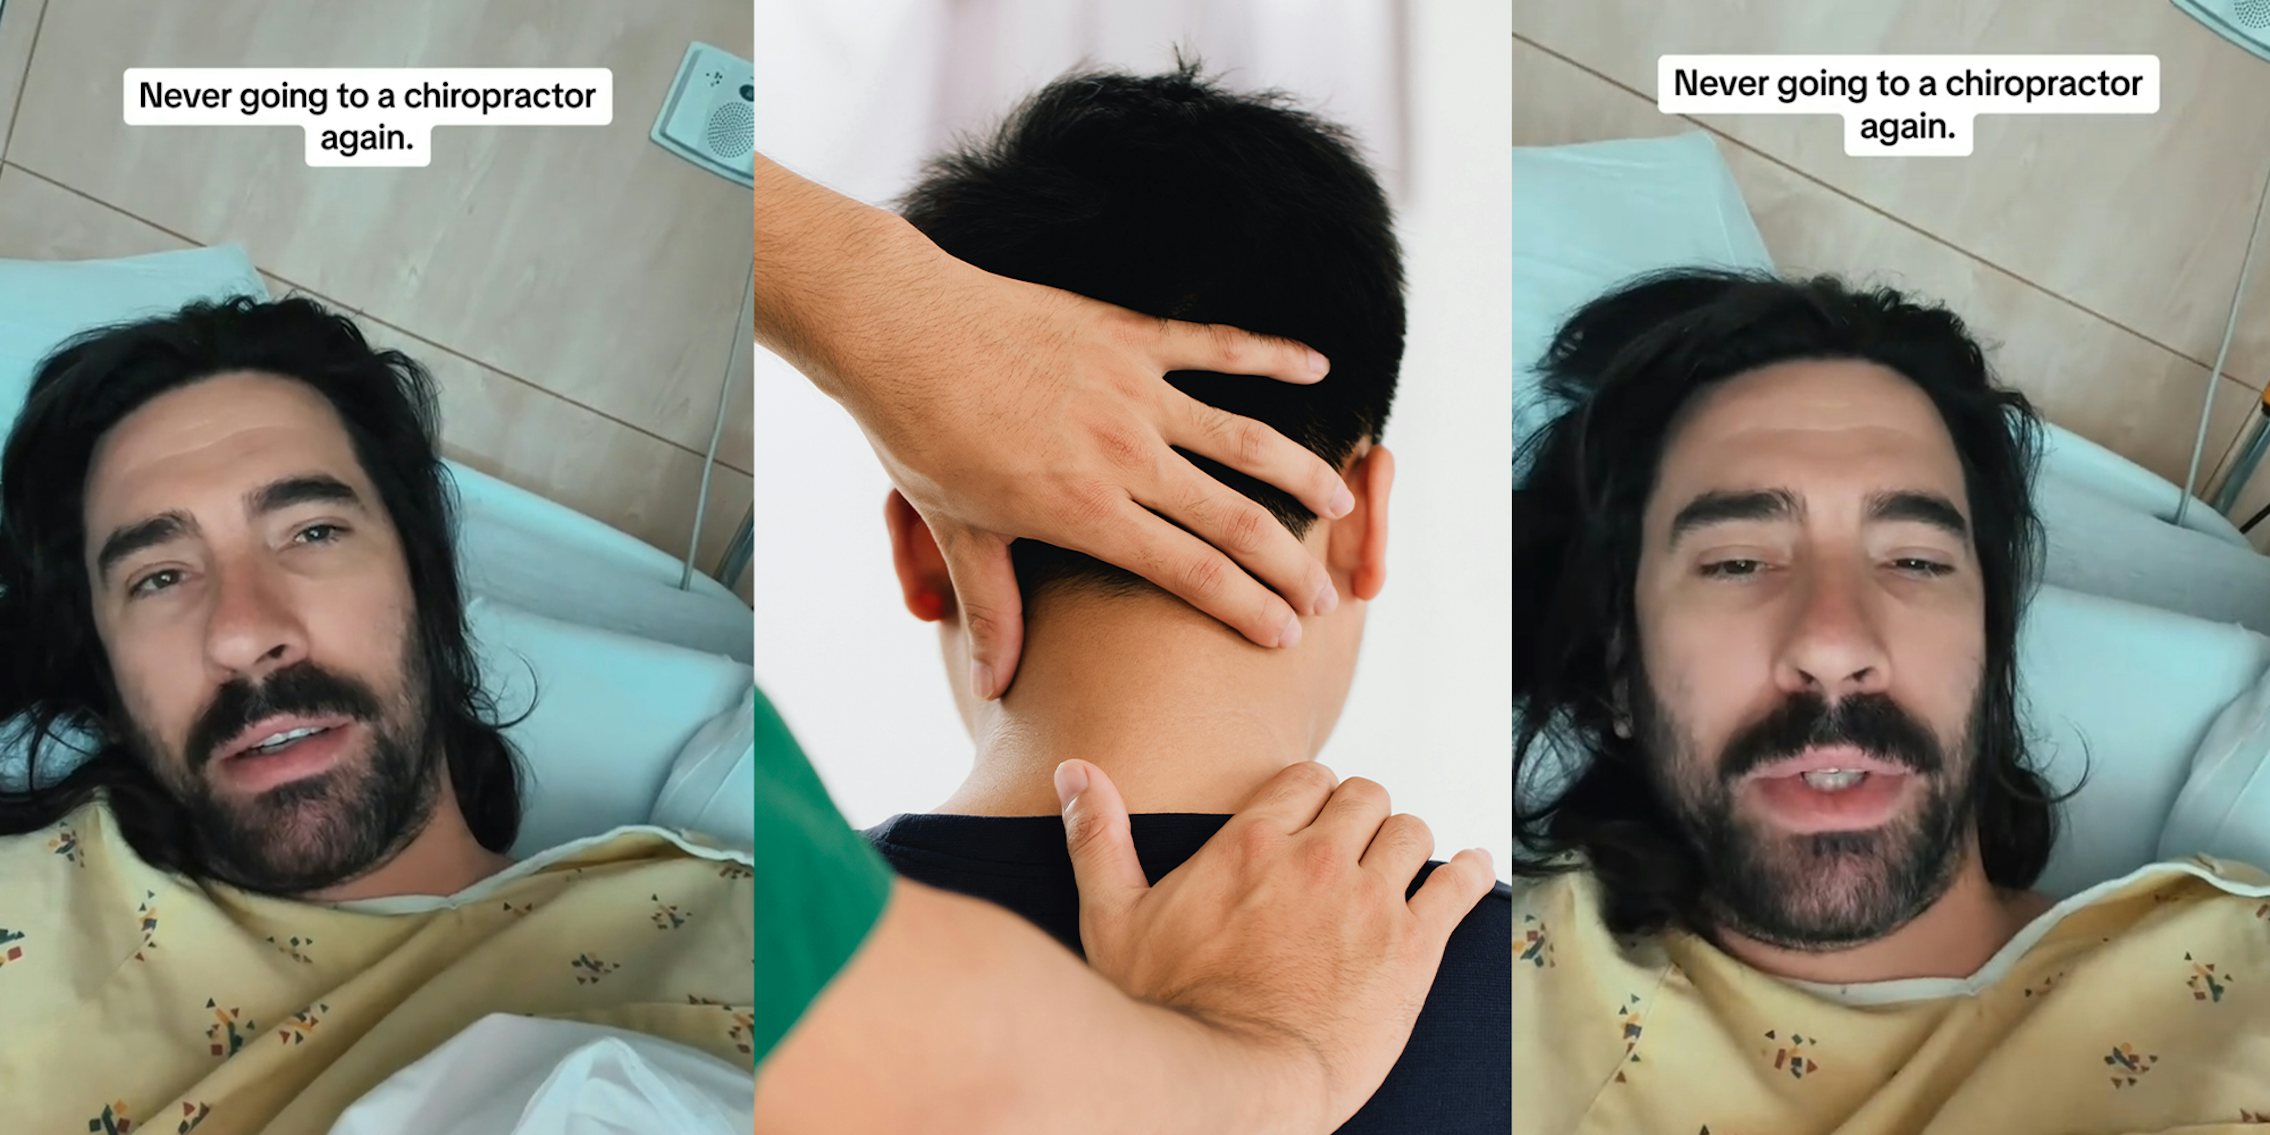 TikToker lands in hospital after going to chiropractor